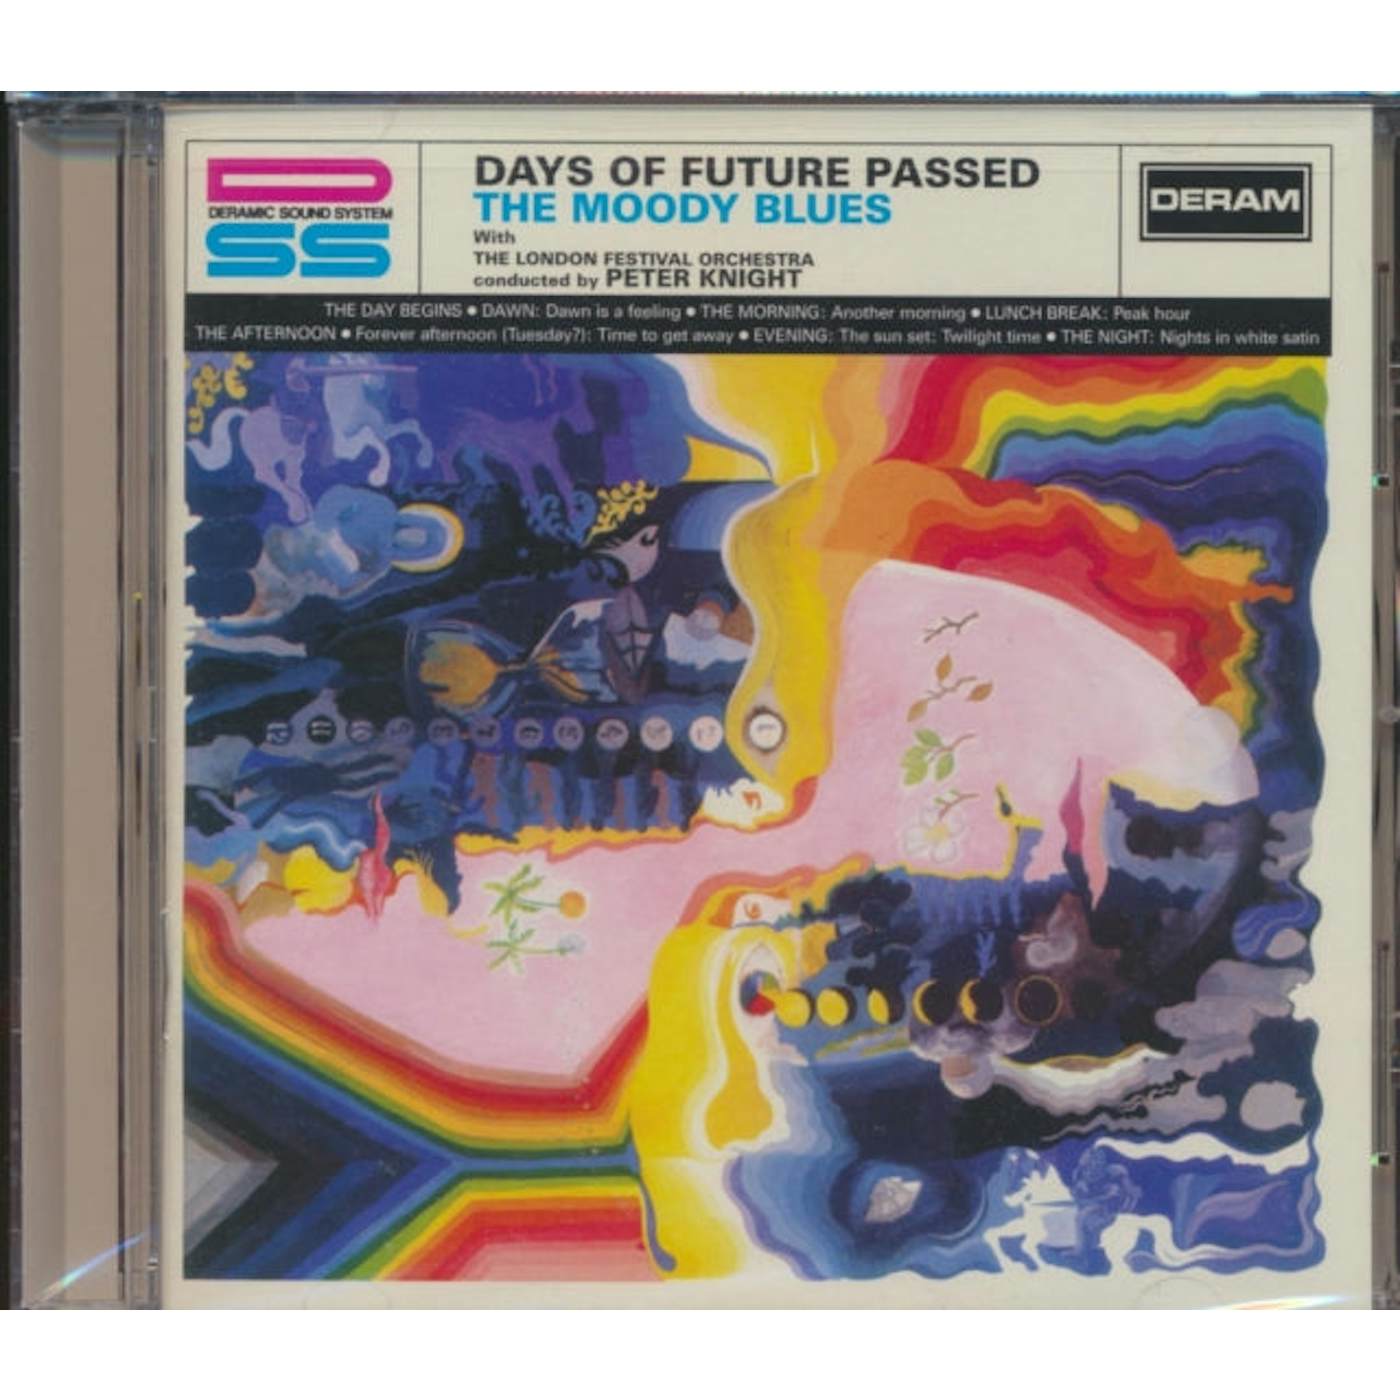 The Moody Blues CD - Days Of Future Passed